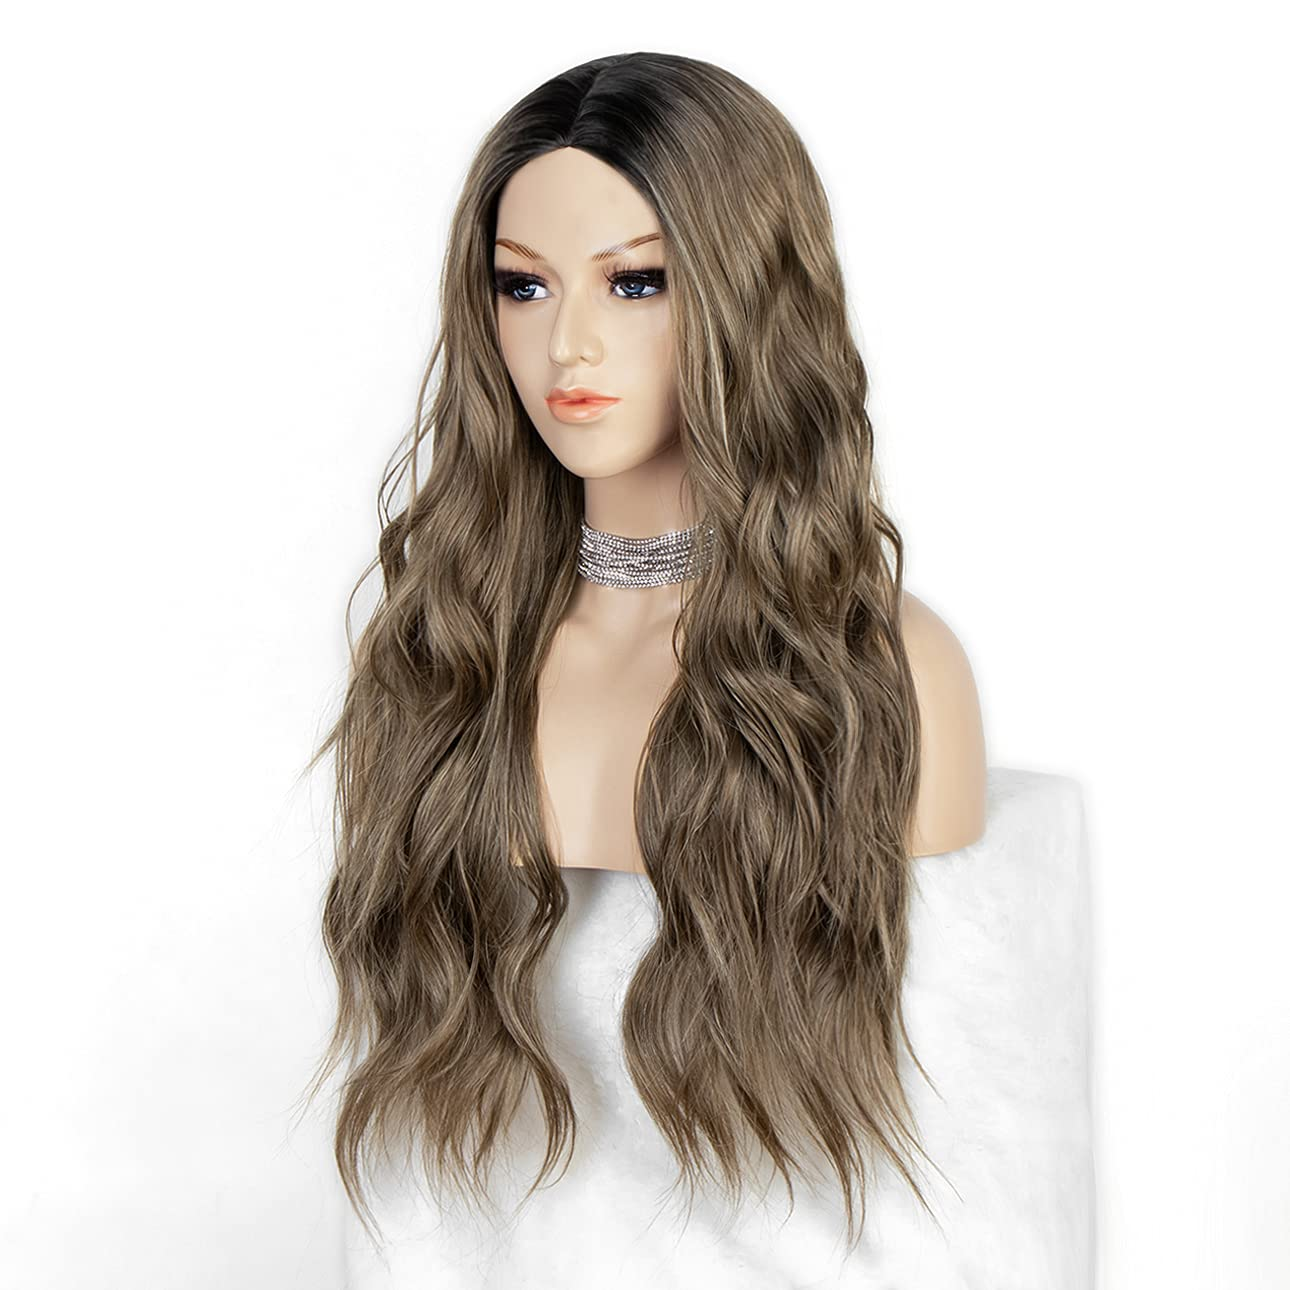 K'Ryssma Long Brown Wig Ombre Wavy Synthteic Wig with Dark Roots Natural Looking Brown Ombre Wig for Women 22 Inches